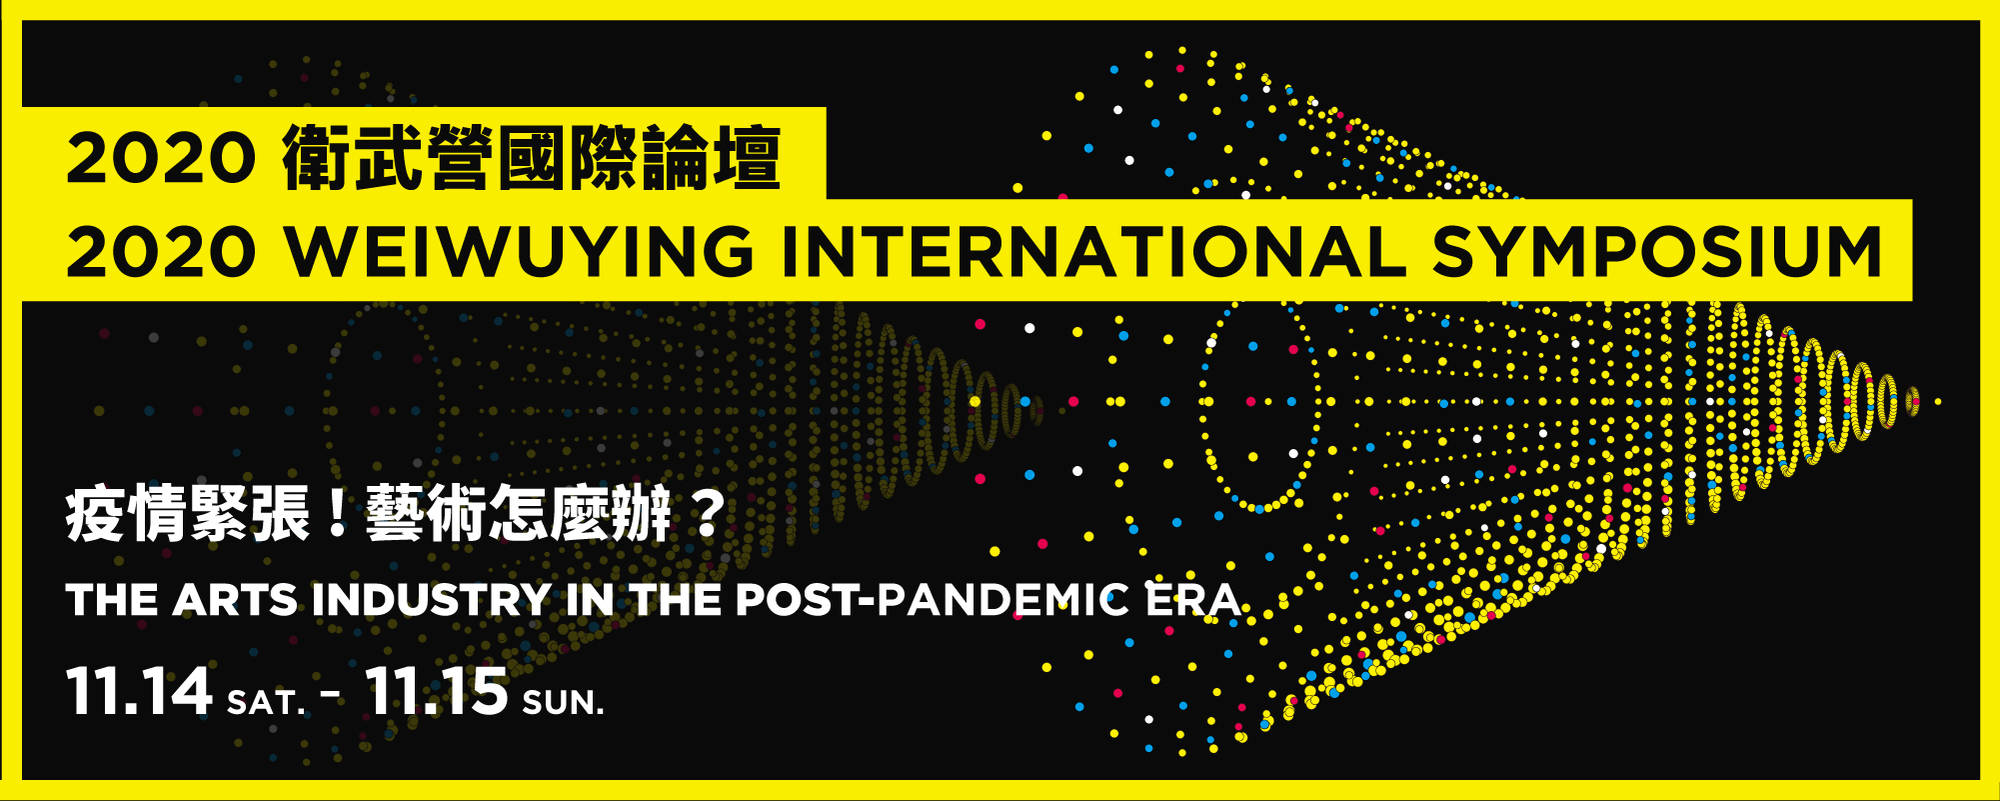 2020 Weiwuying International Symposium－The Arts Industry in the Post-pandemic Era 